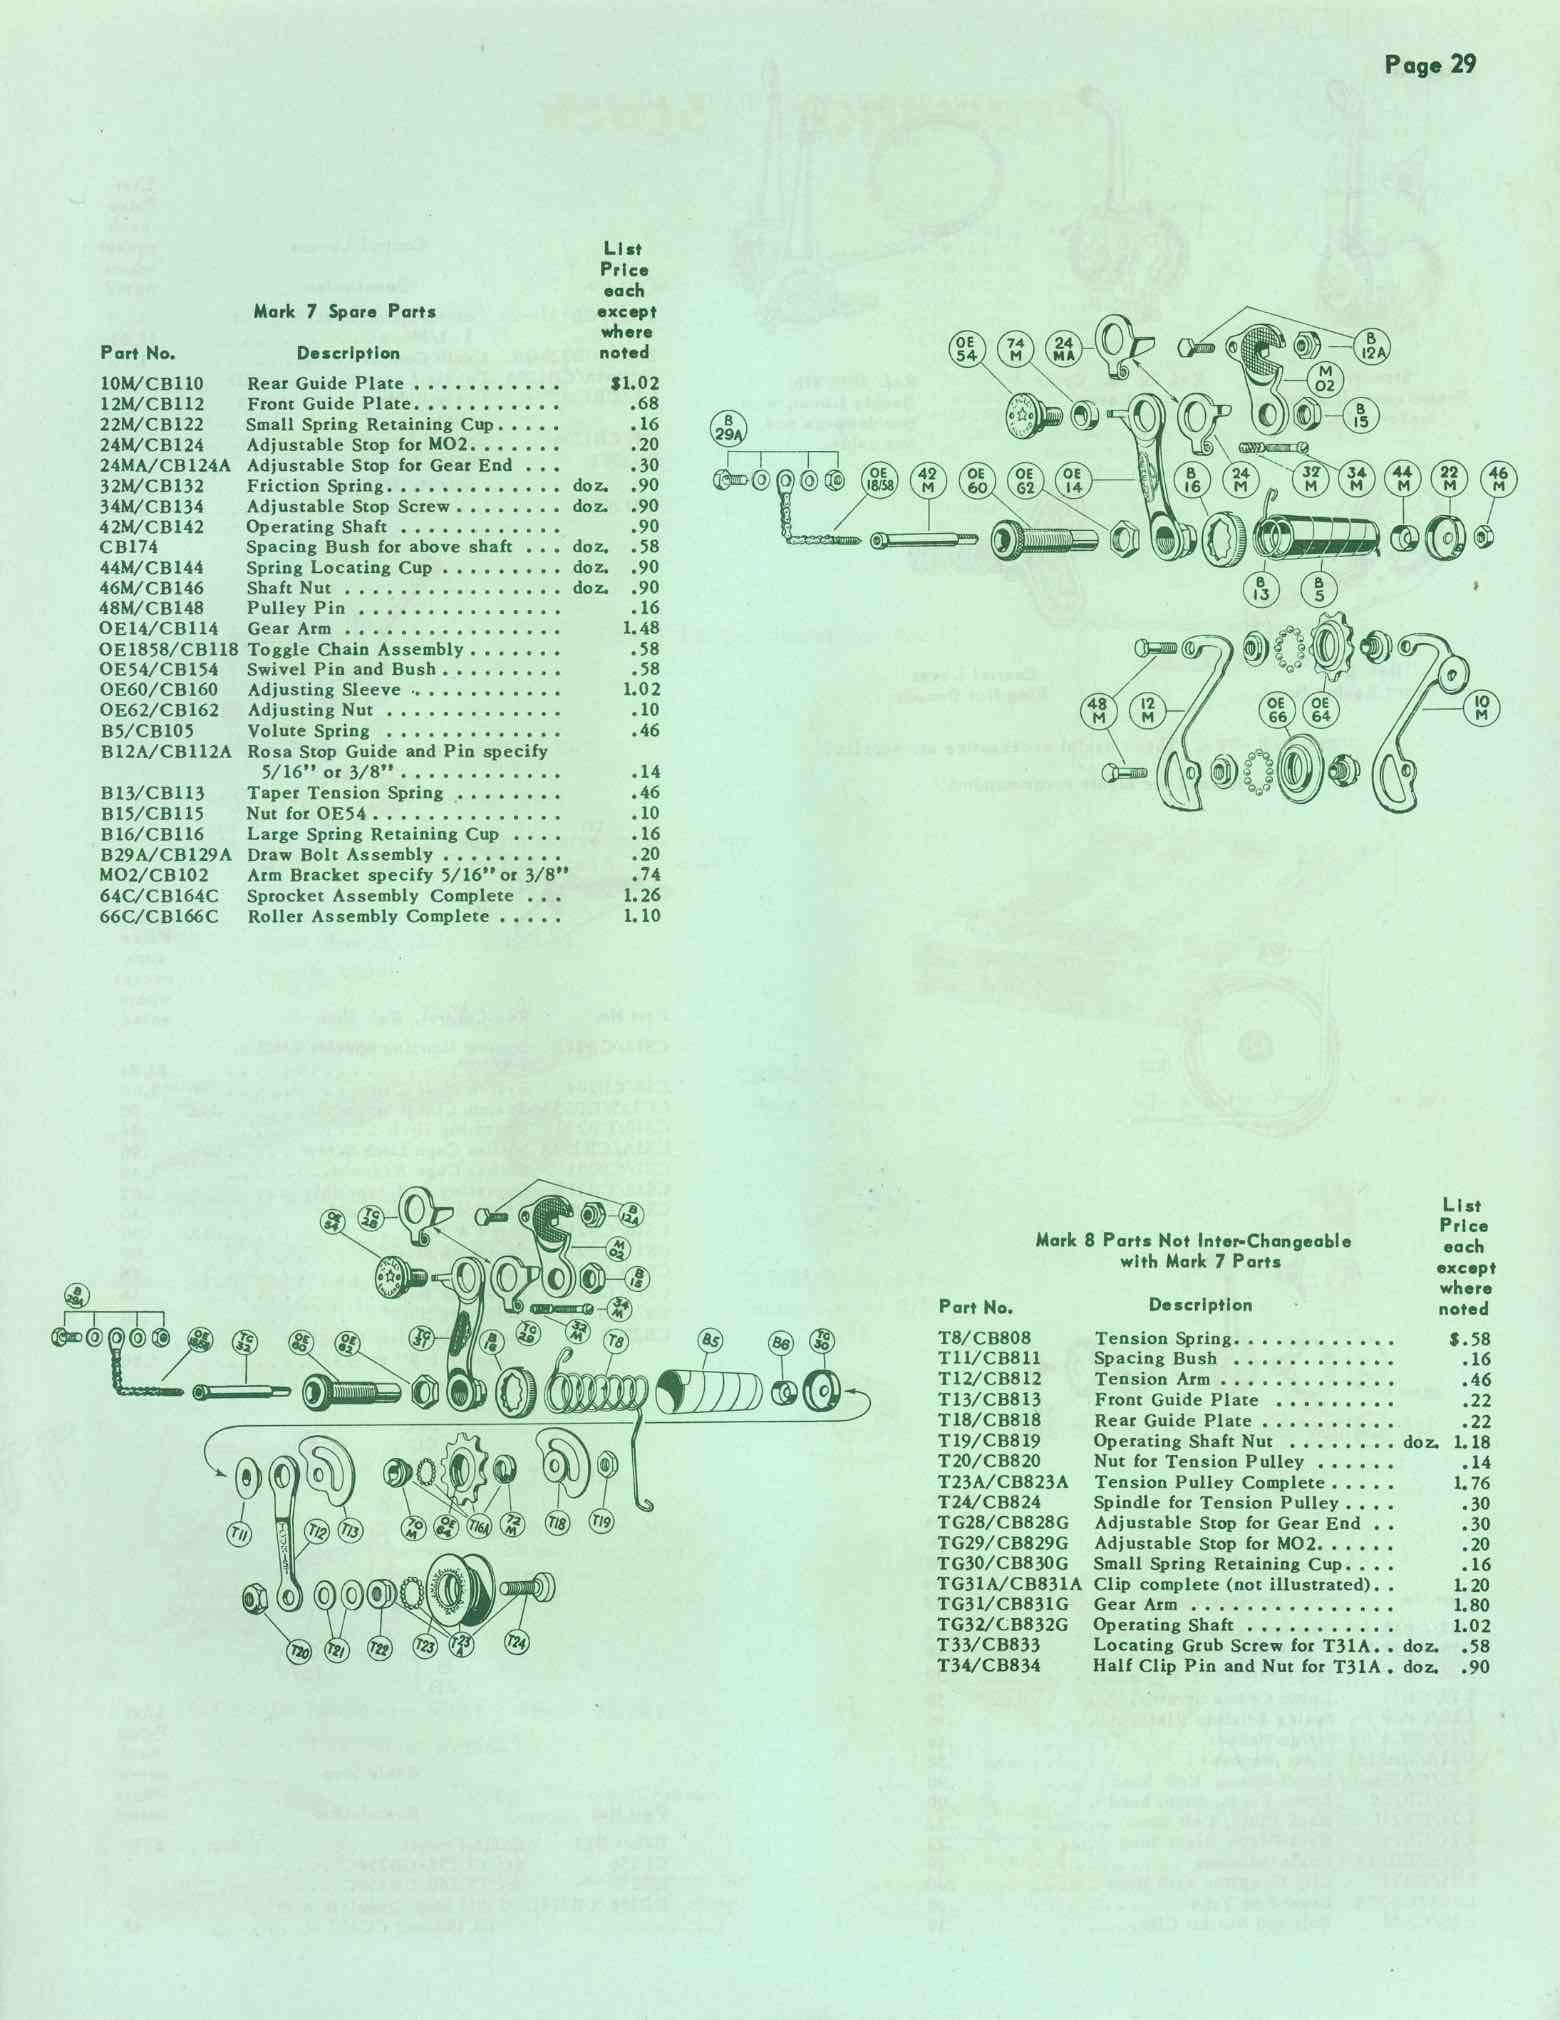 Cyclo Benelux Parts List & Prices 0691 - page 29 main image